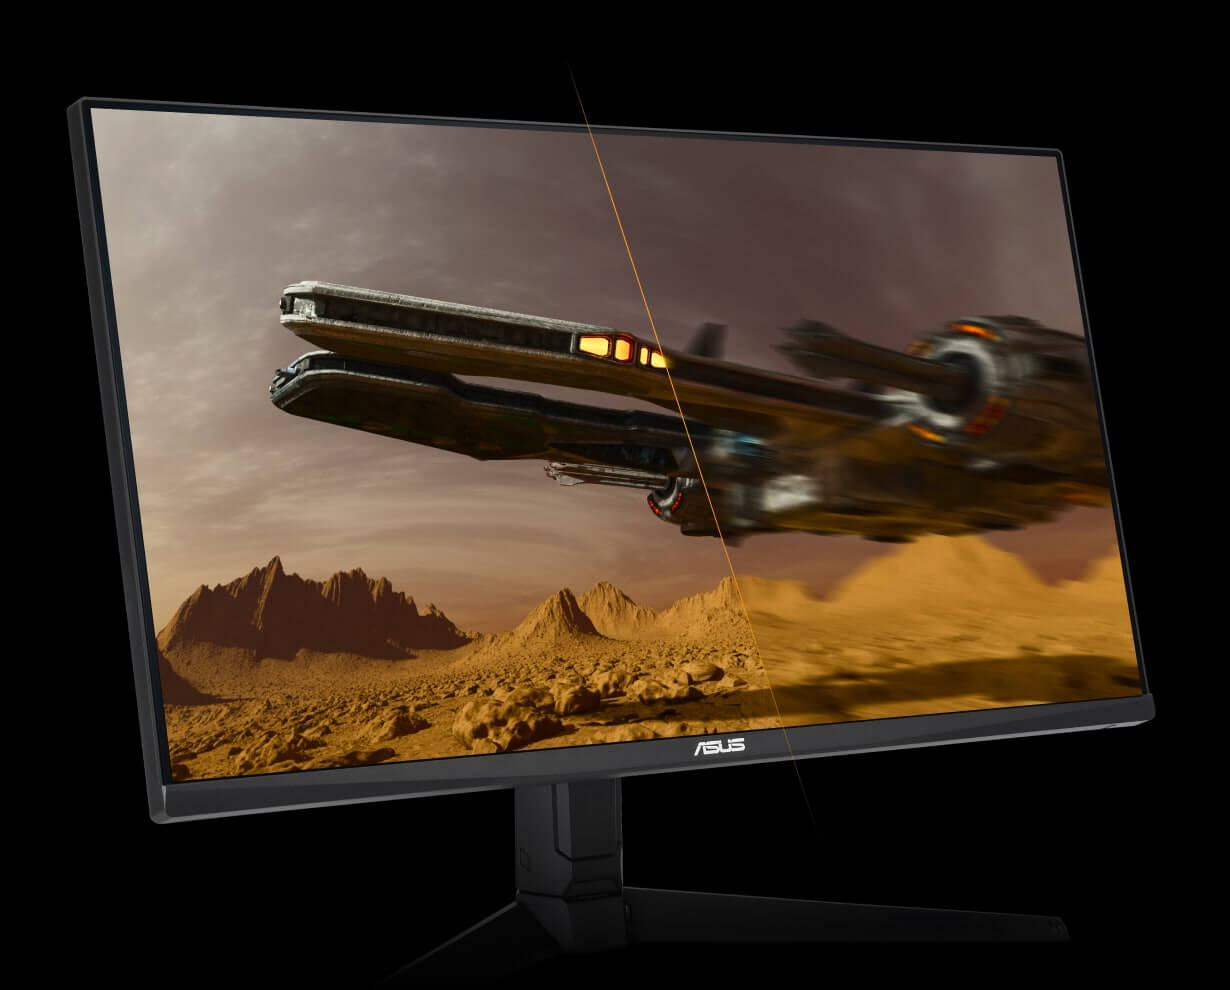 The comparison image of ultra-fast 144 Hz refresh rate and 60Hz